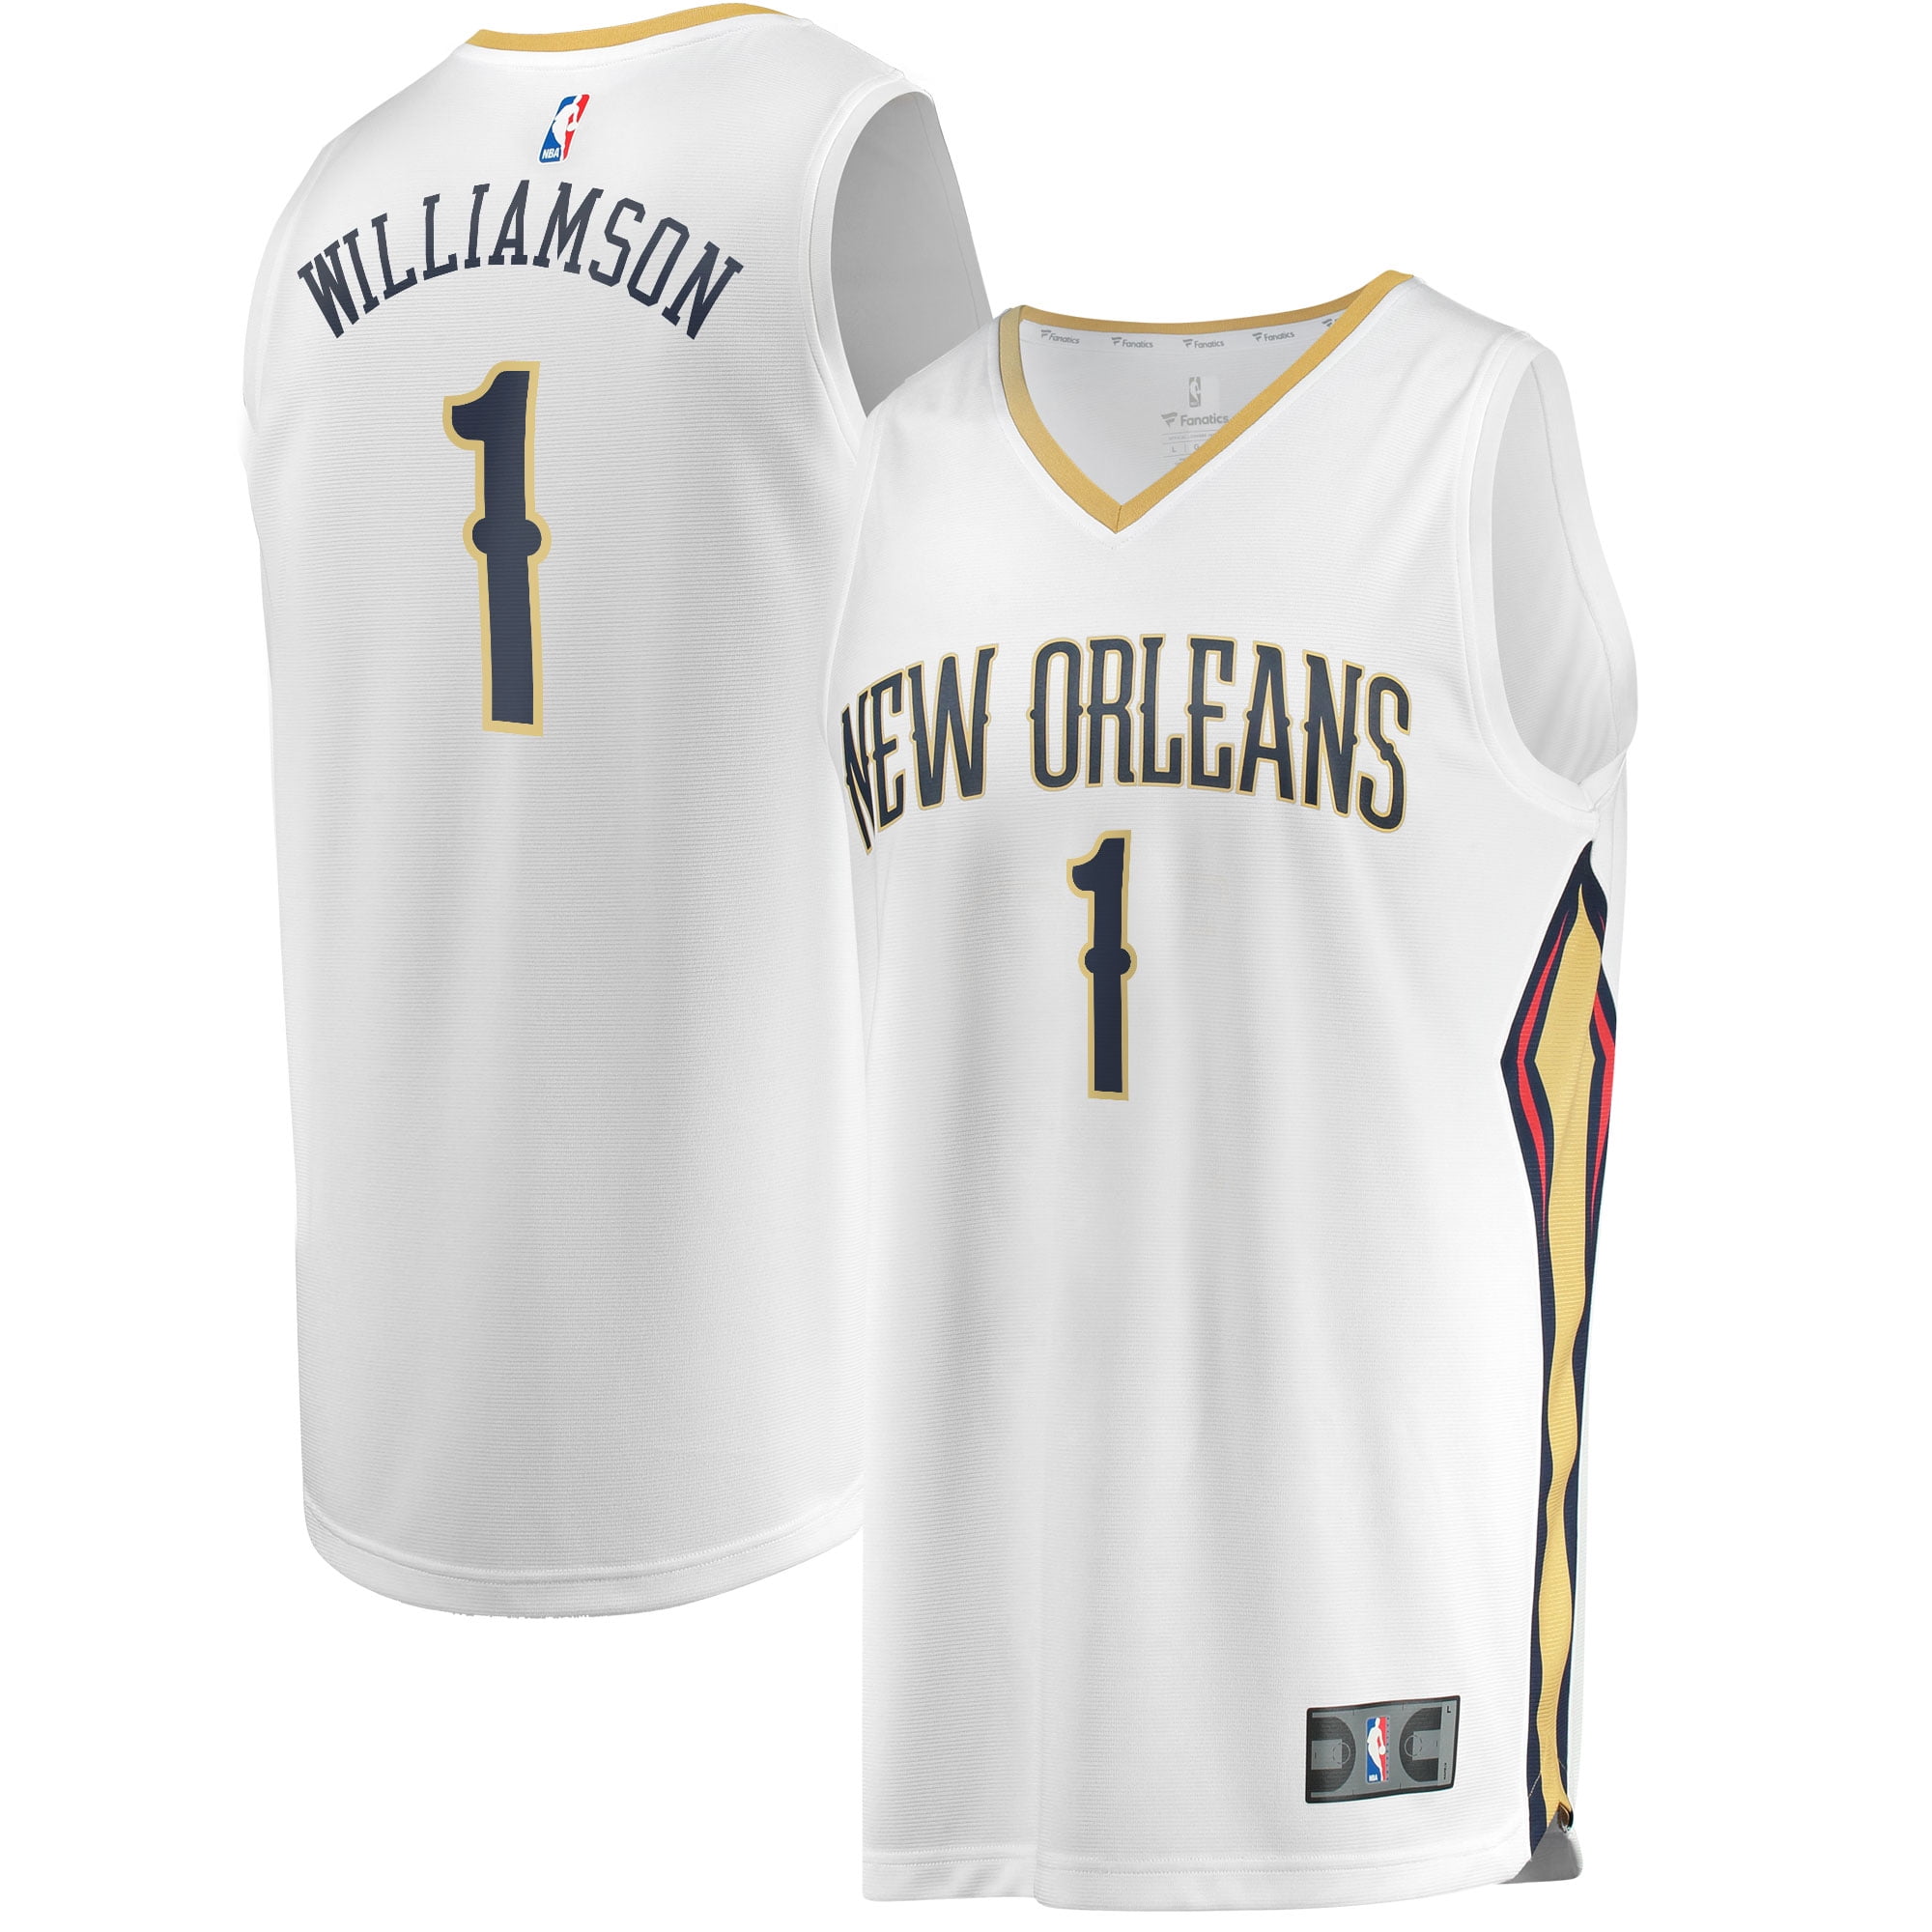 Classic Zion Williamson #1 New Orleans Pelicans Basketball Jersey Stitched Red 